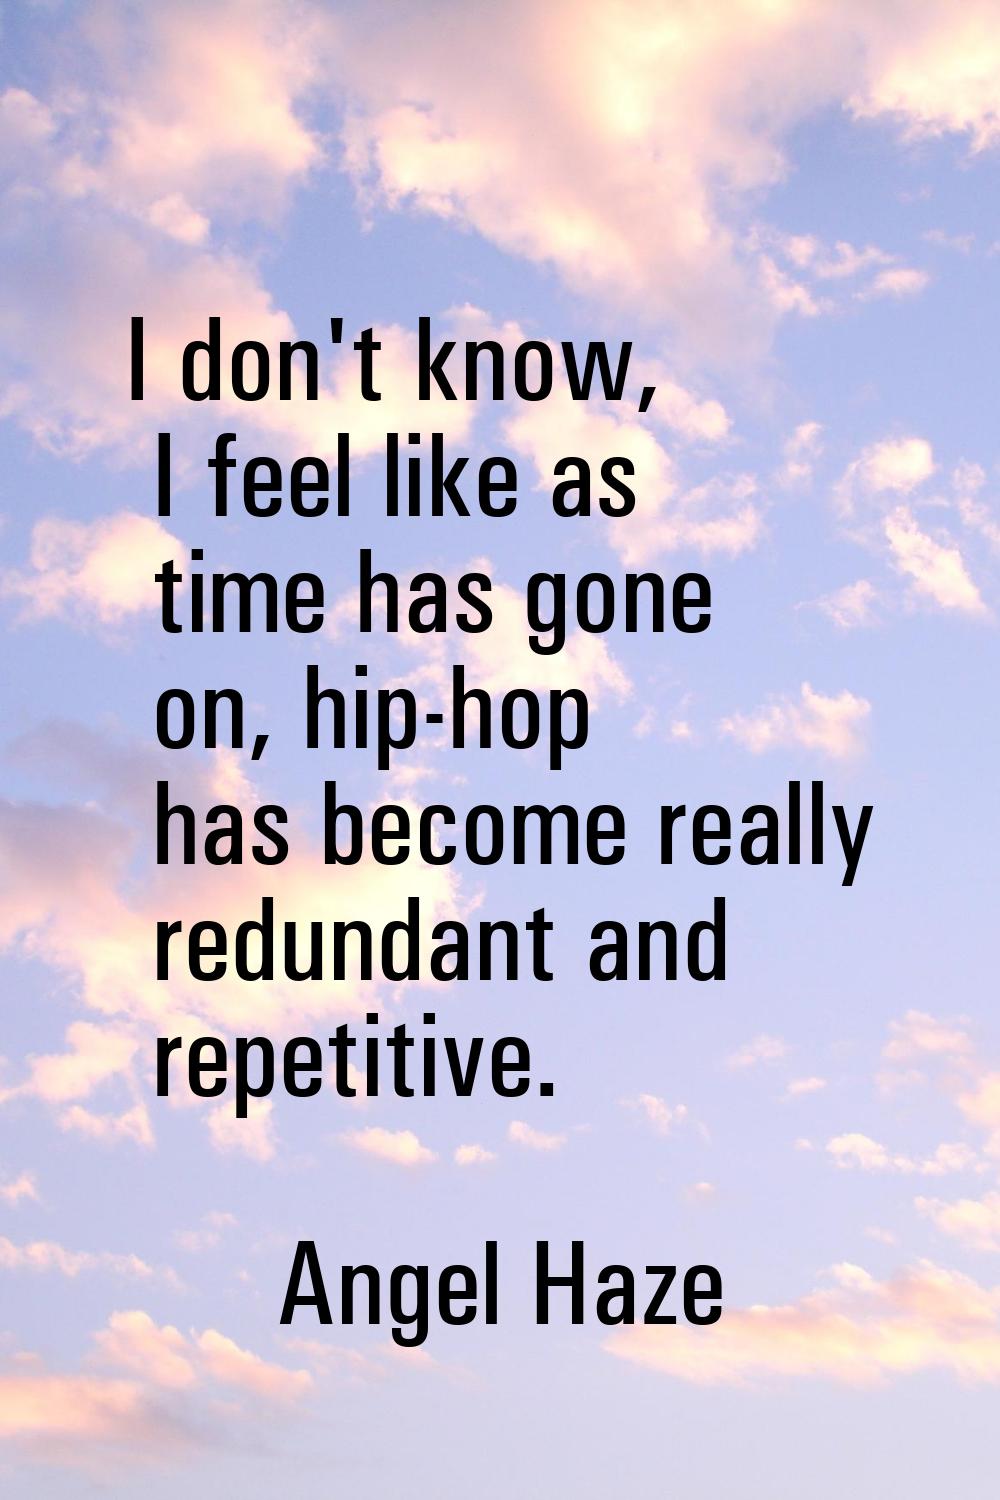 I don't know, I feel like as time has gone on, hip-hop has become really redundant and repetitive.